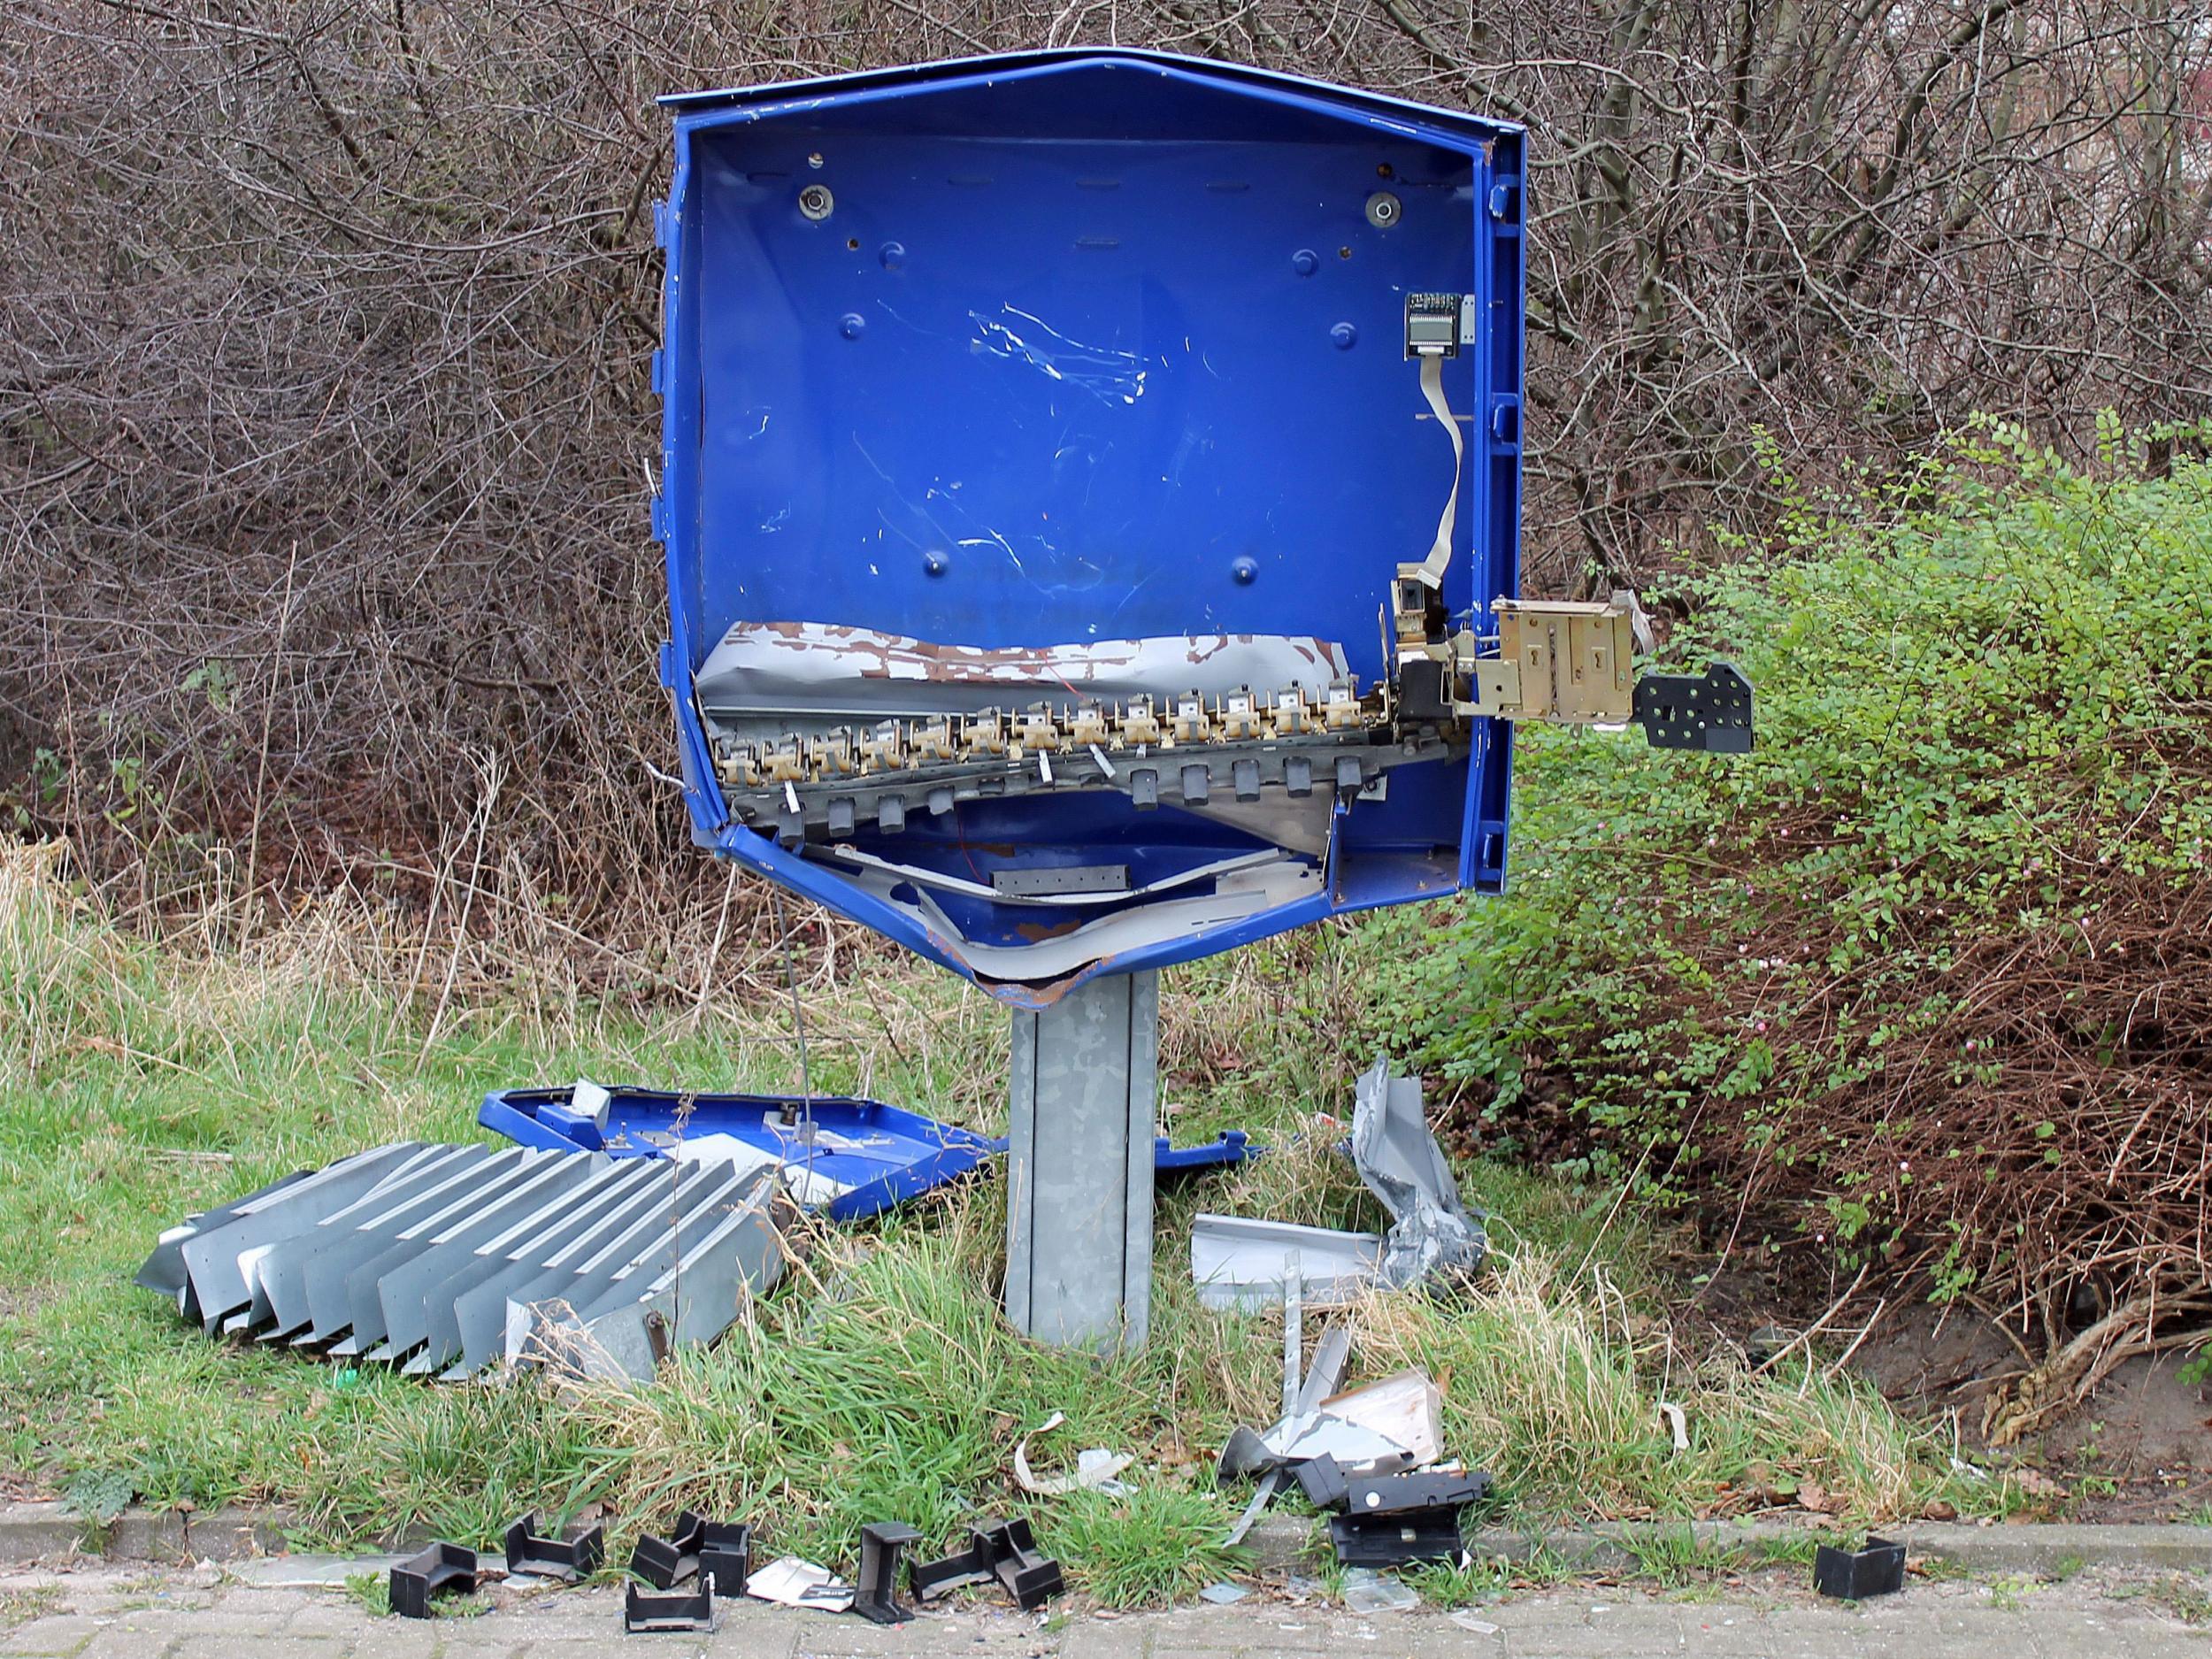 The remains of a condom dispenser after an explosion in Schoeppingen, Germany